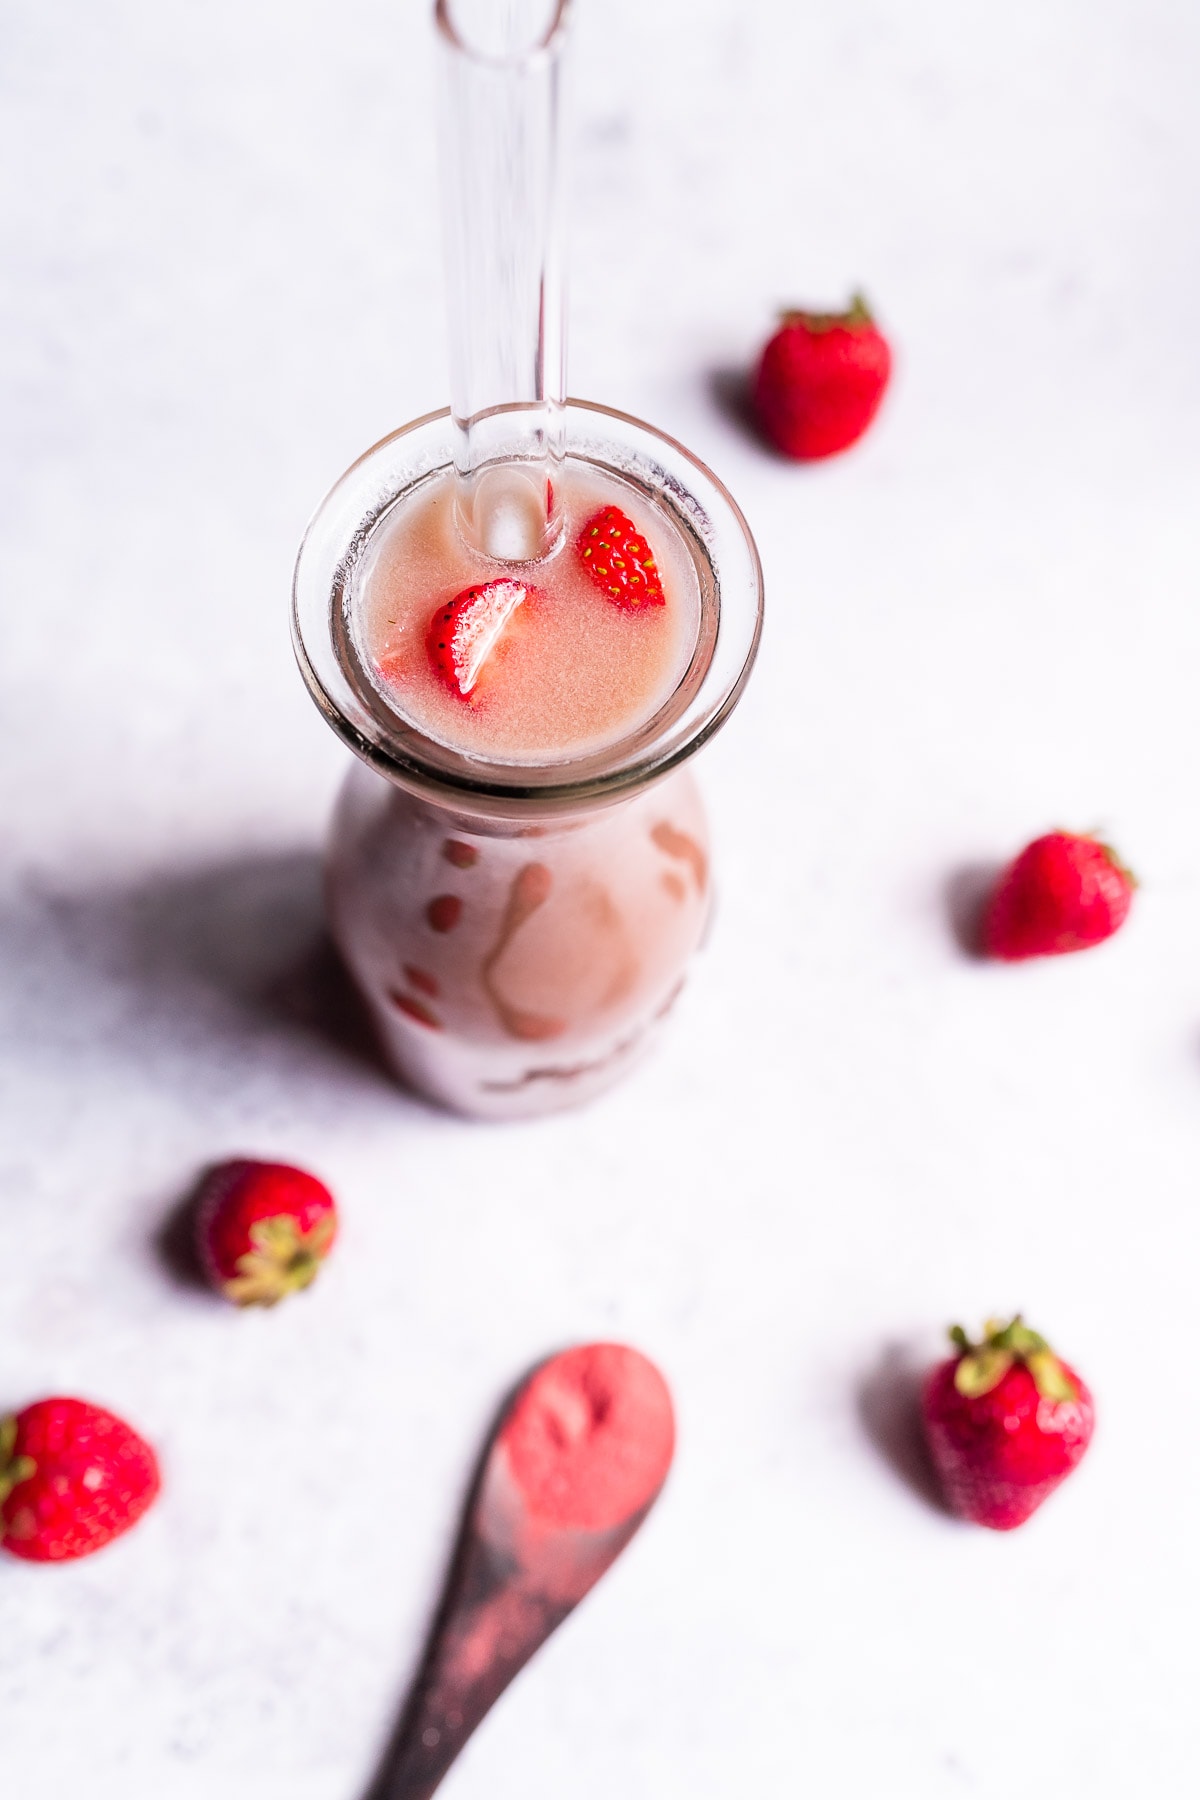 A large boba tea straw sticks out of a clear glass filled with a pink liquid and  freshly sliced strawberries.